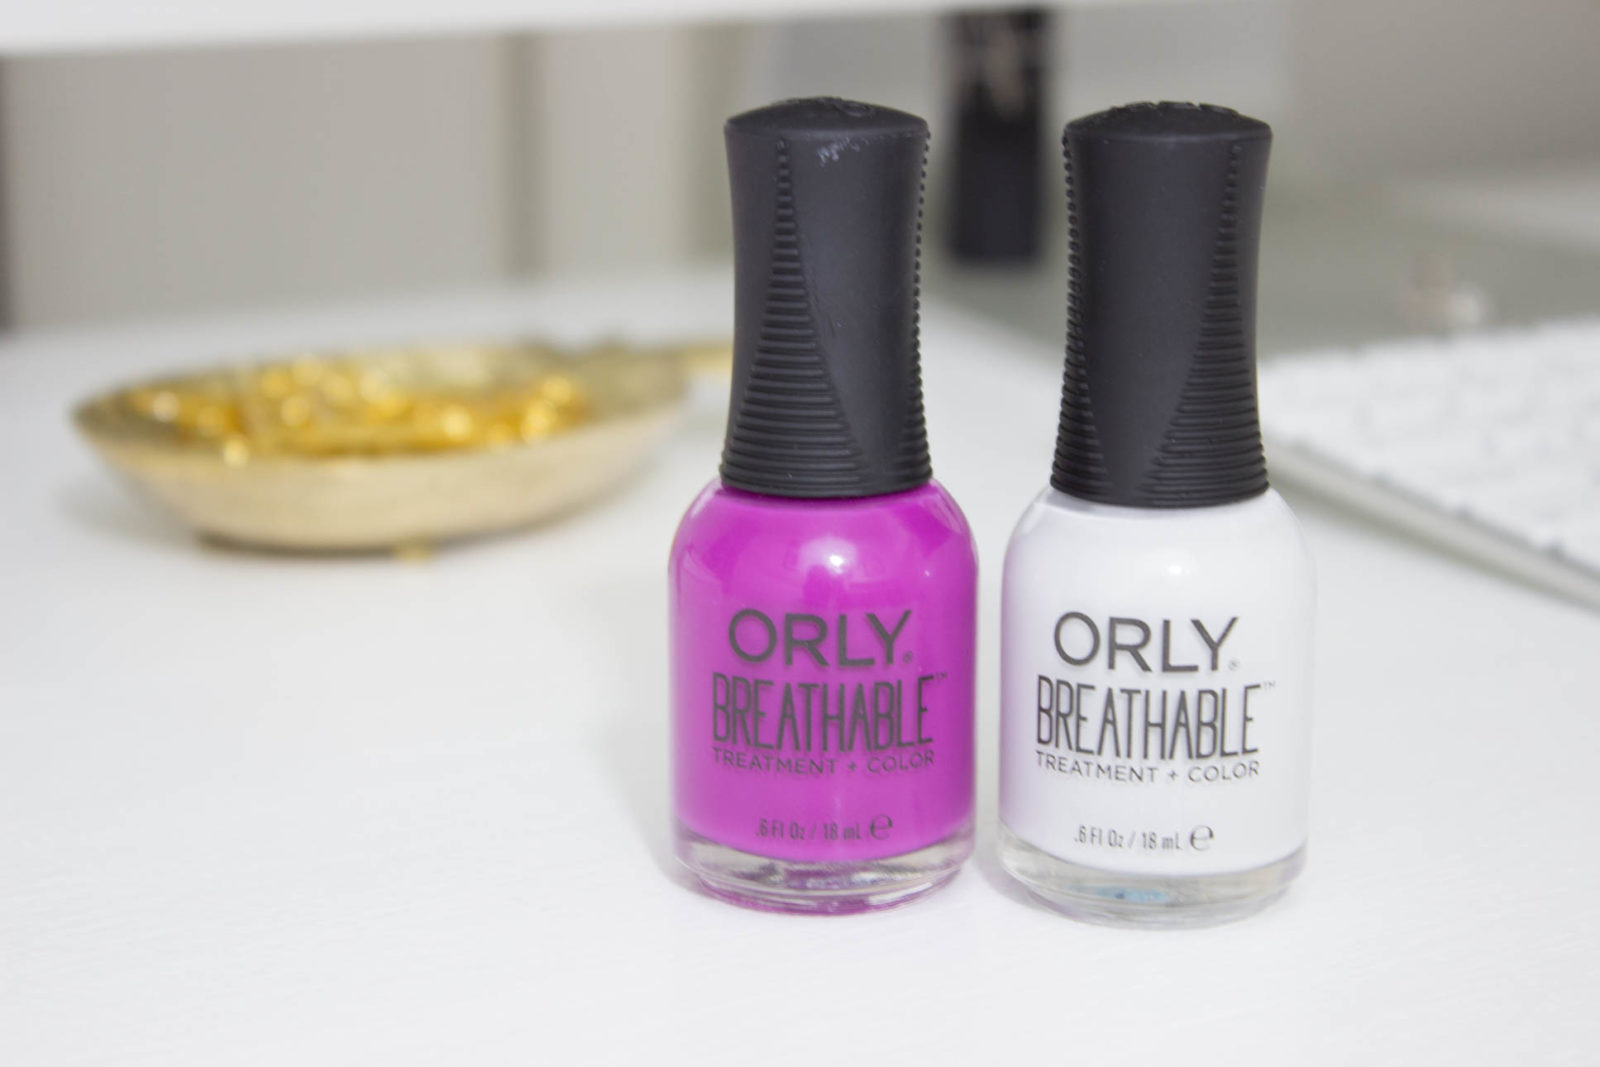 6. Orly Breathable Treatment + Color Nail Polish, Argan Oil Infused Nail Color - wide 8